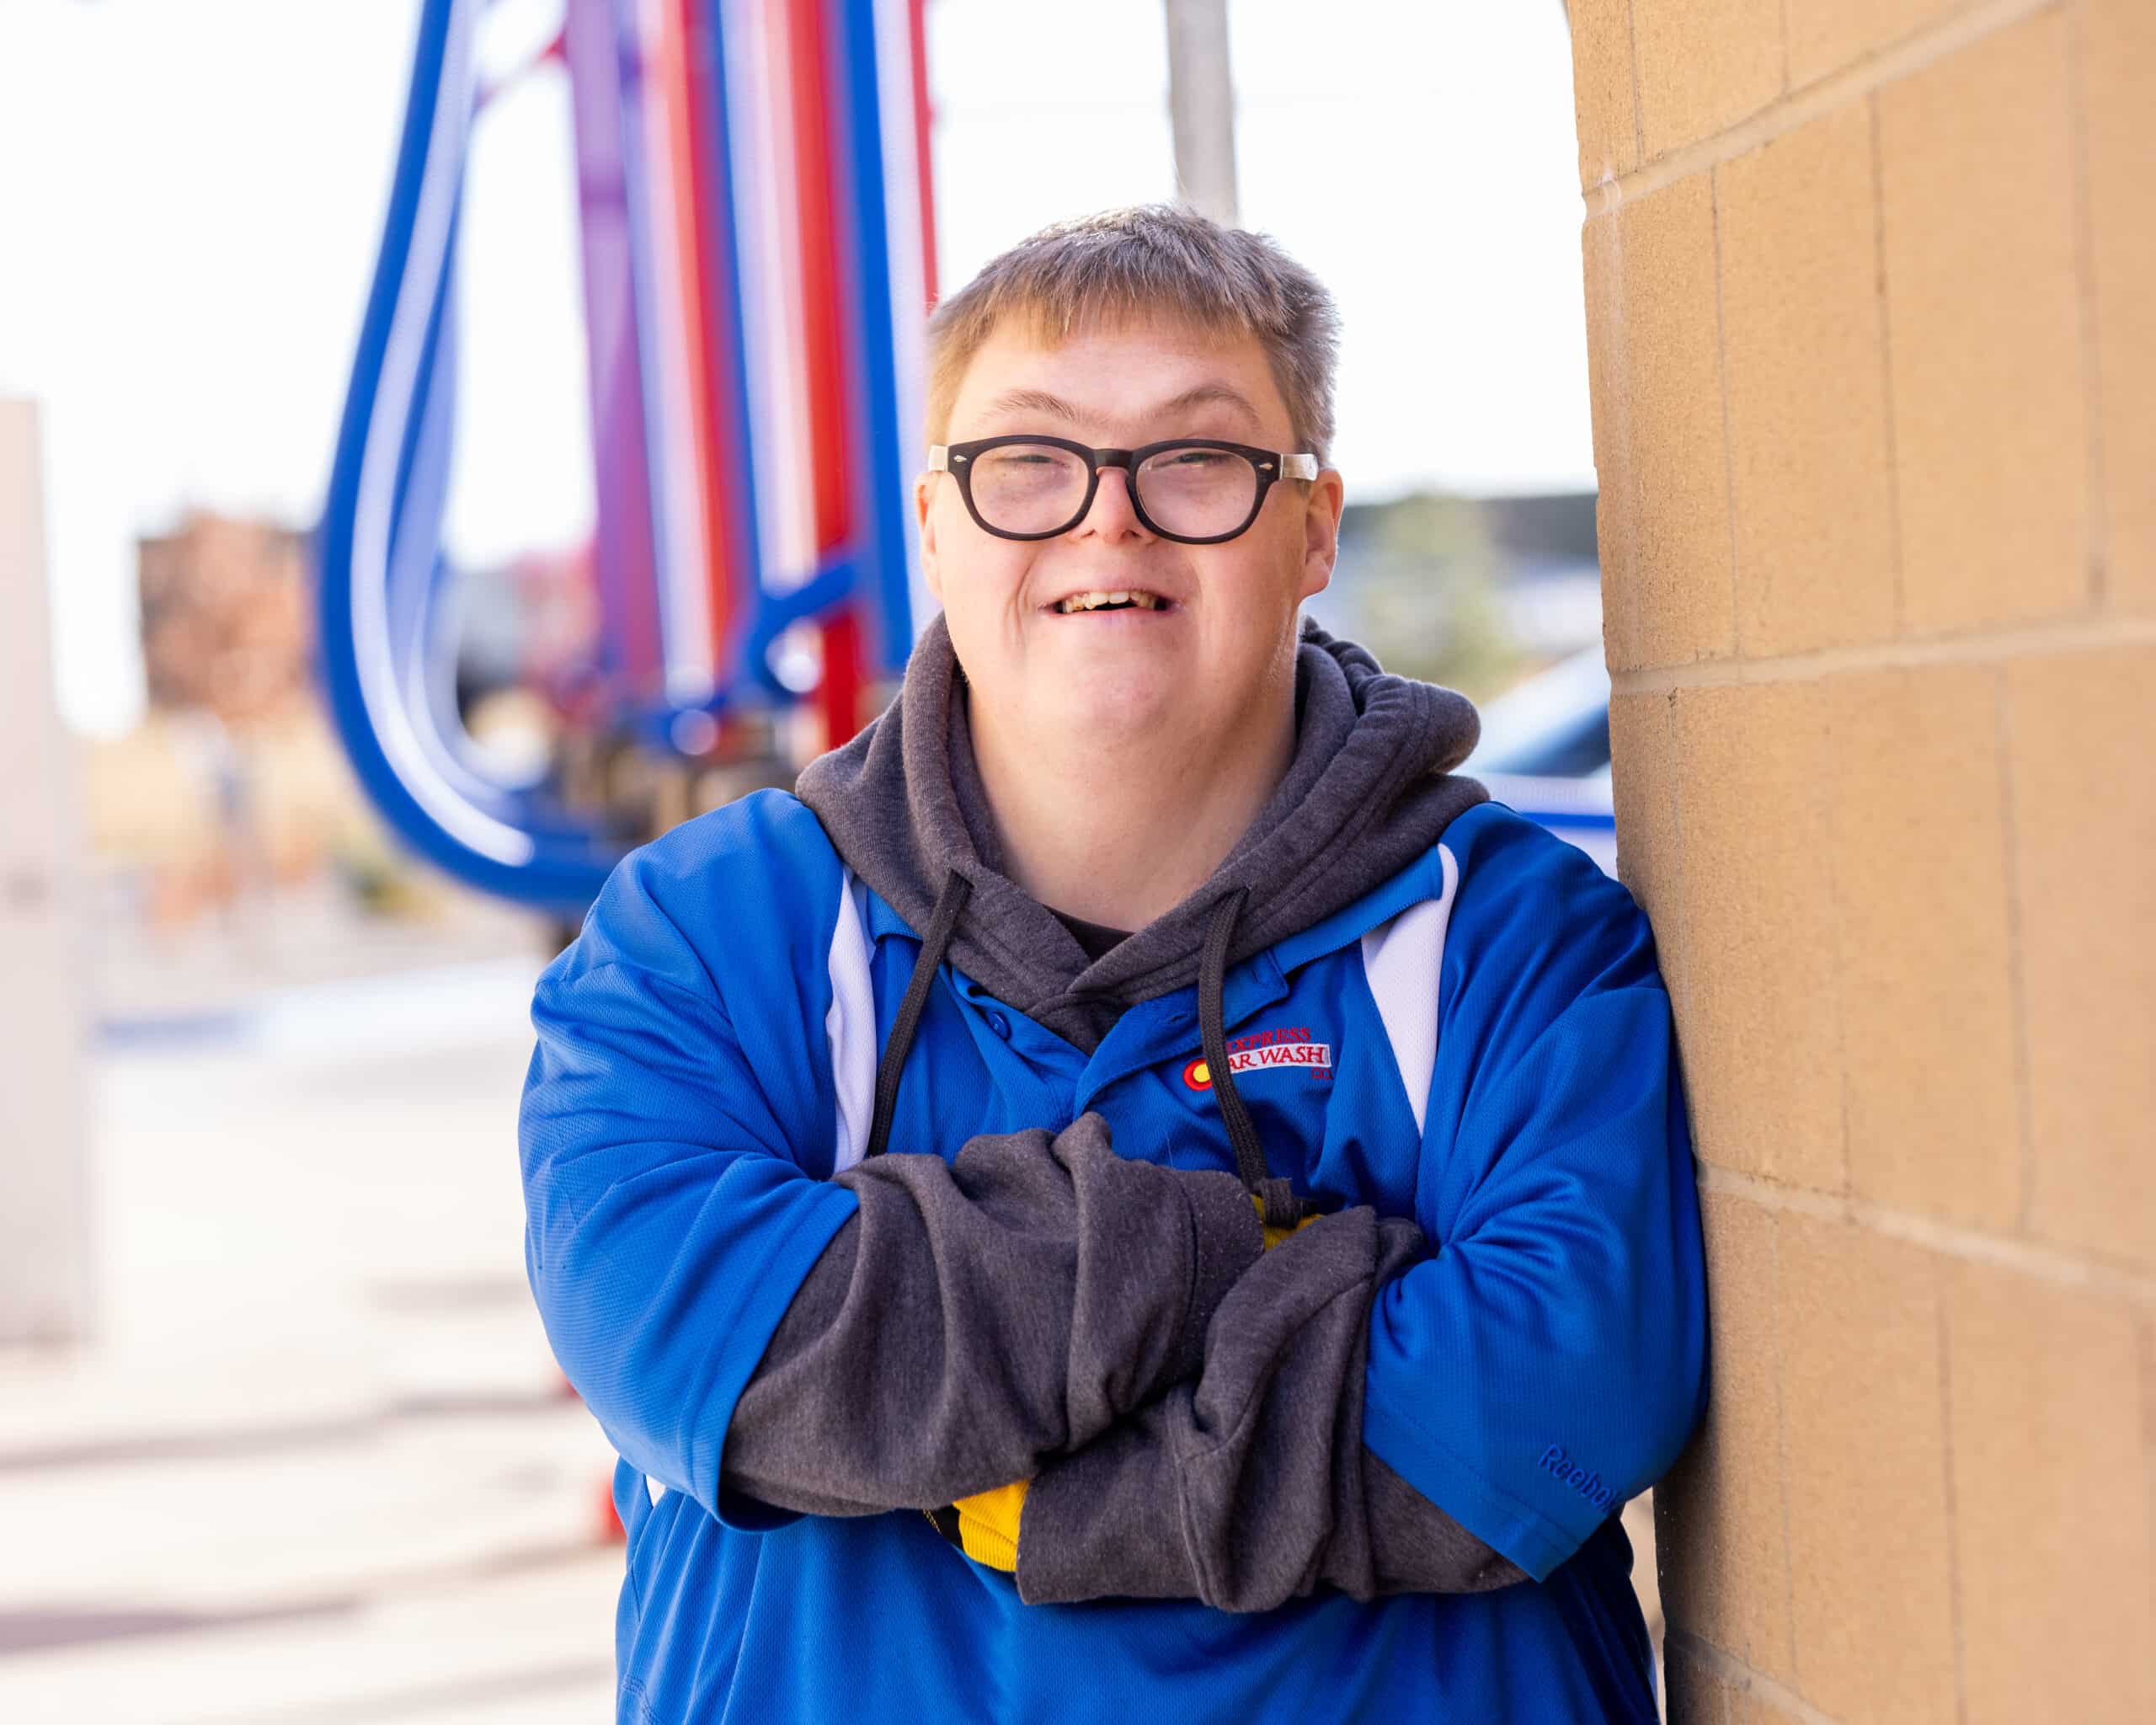 Young man with Down syndrome at work